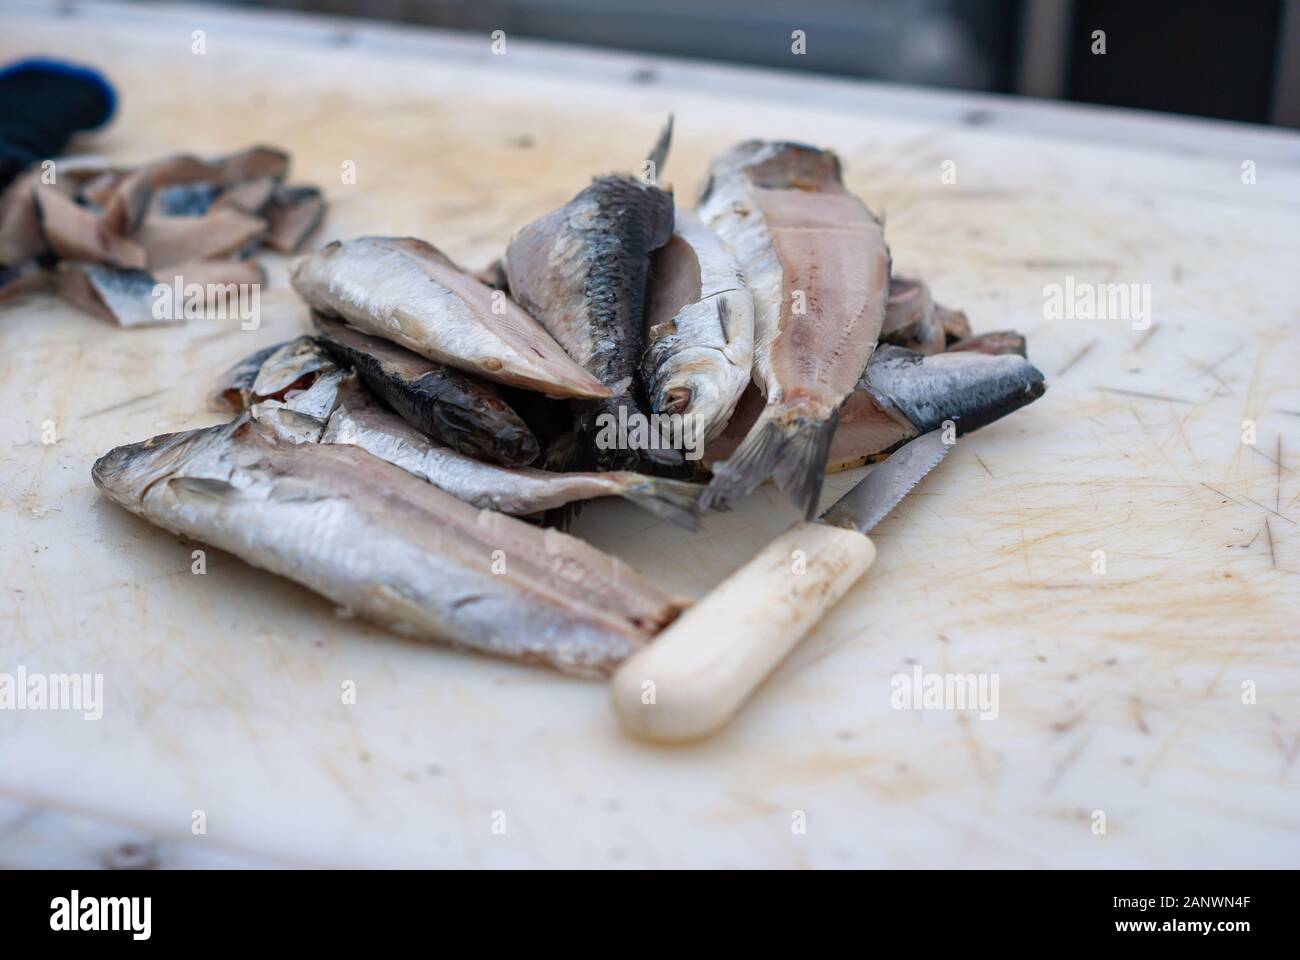 Small fish next to white handled knife on white cutting board Stock Photo